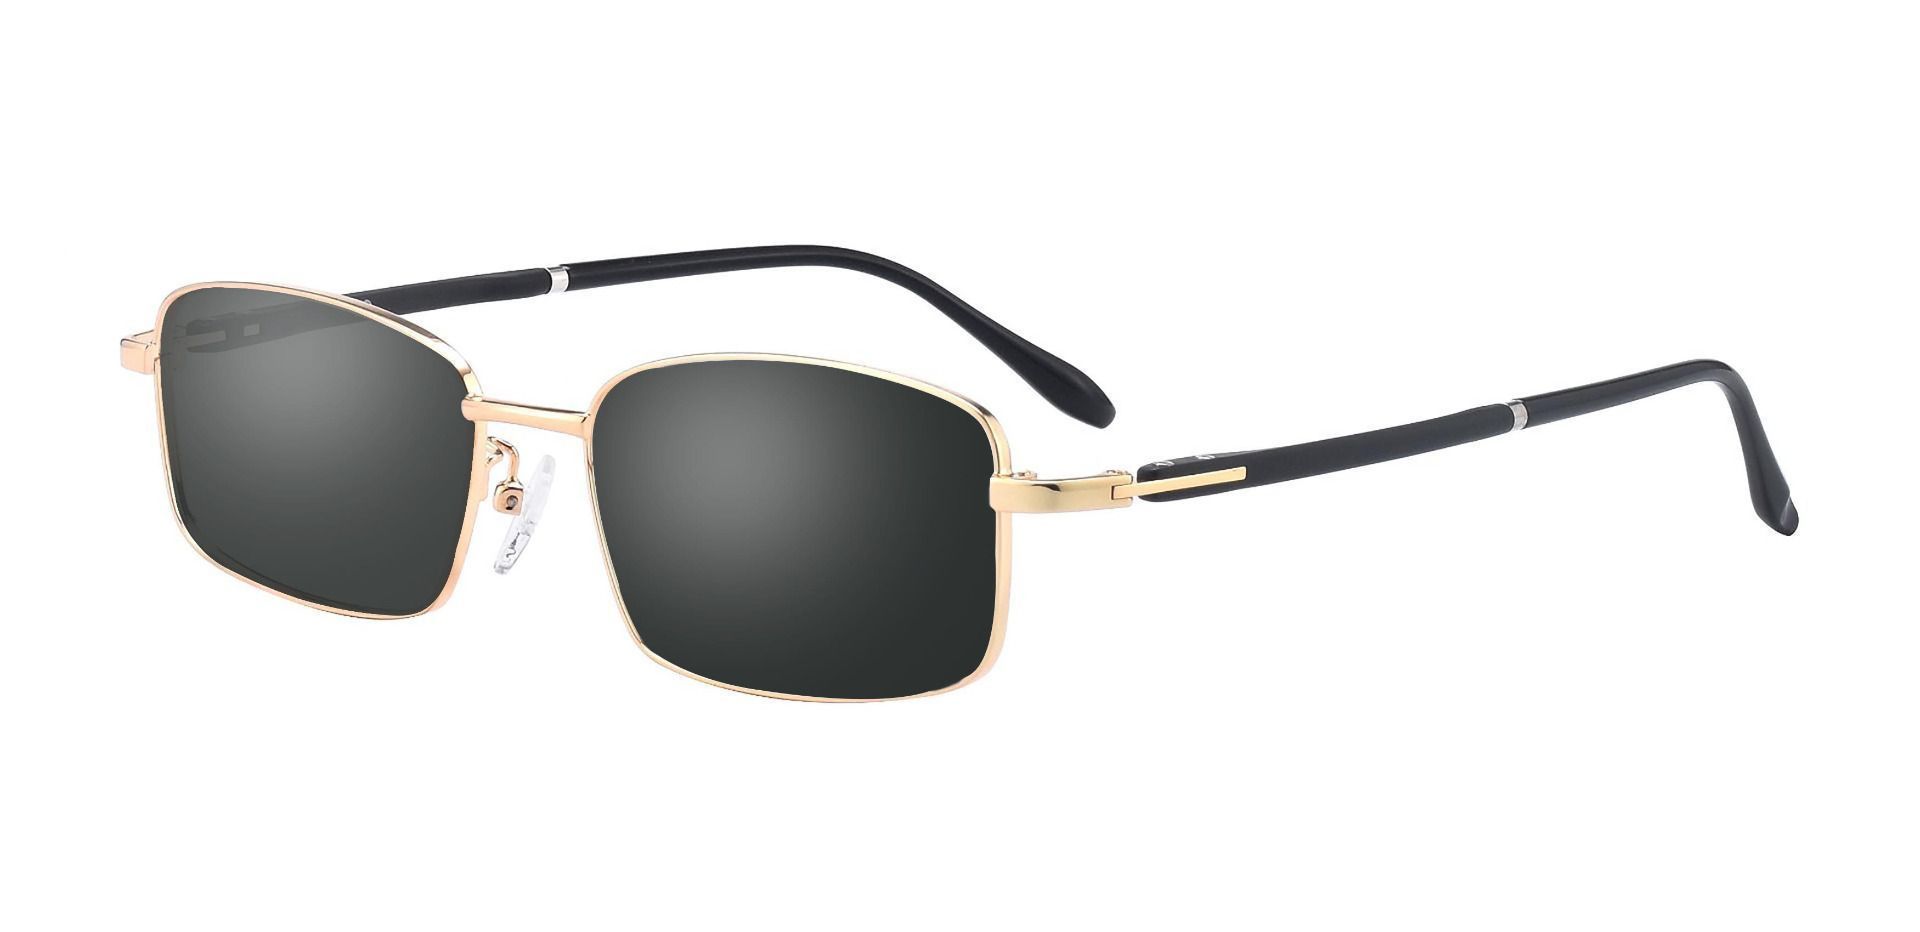 Press Rectangle Reading Sunglasses - Gold Frame With Gray Lenses